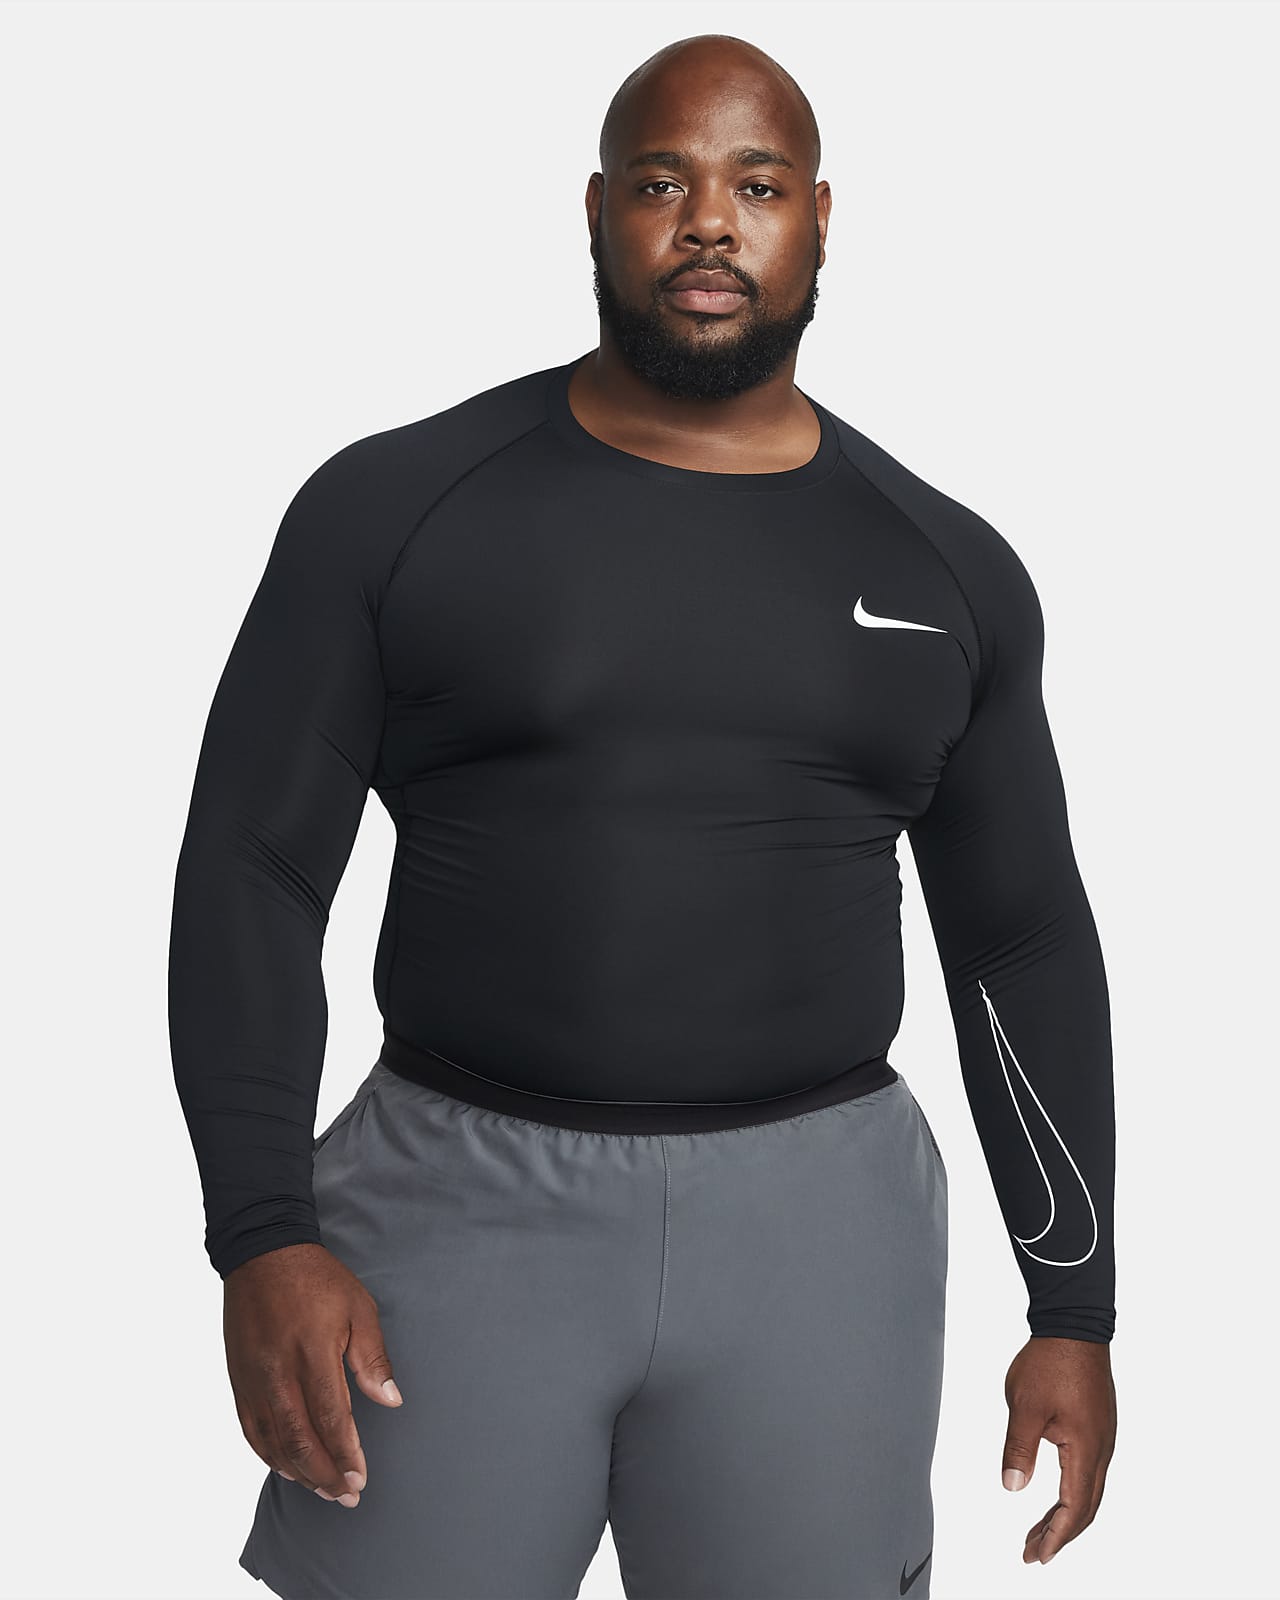  Nike Pro Dri-FIT Men's Tight Fit Long-Sleeve Training Top (as1,  Alpha, s, Regular, Regular, White/Black, Small) : Clothing, Shoes & Jewelry